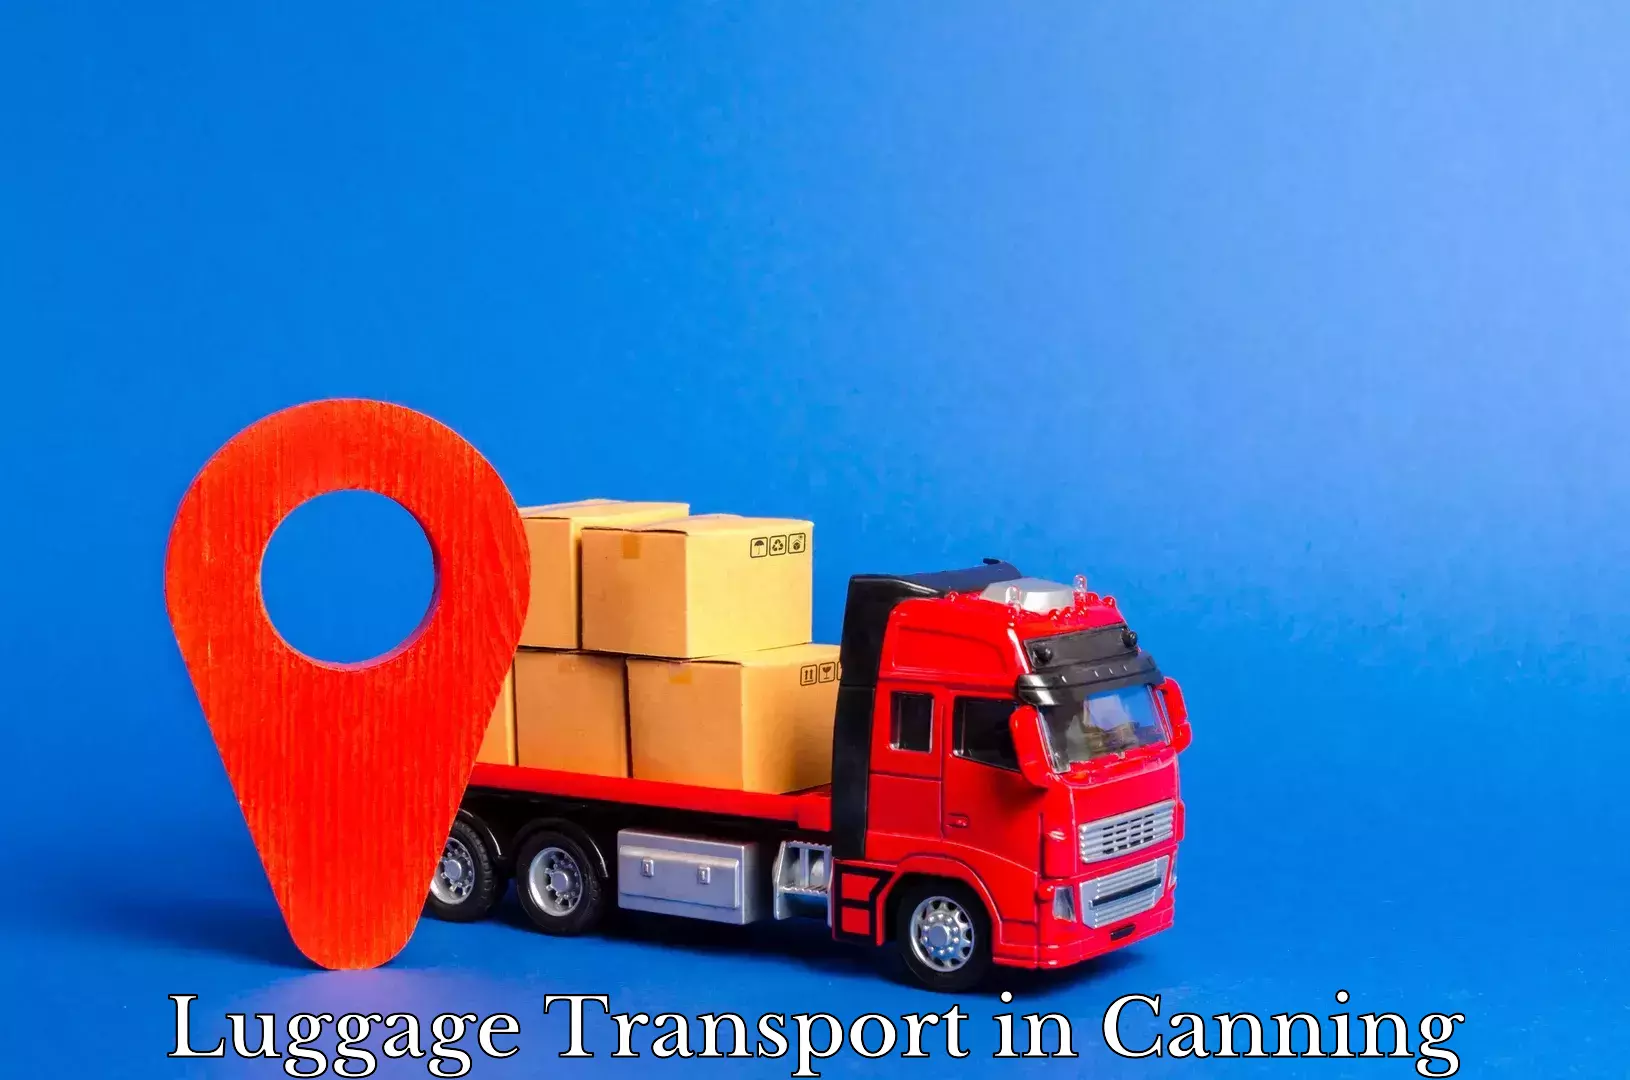 Luggage shipment tracking in Canning